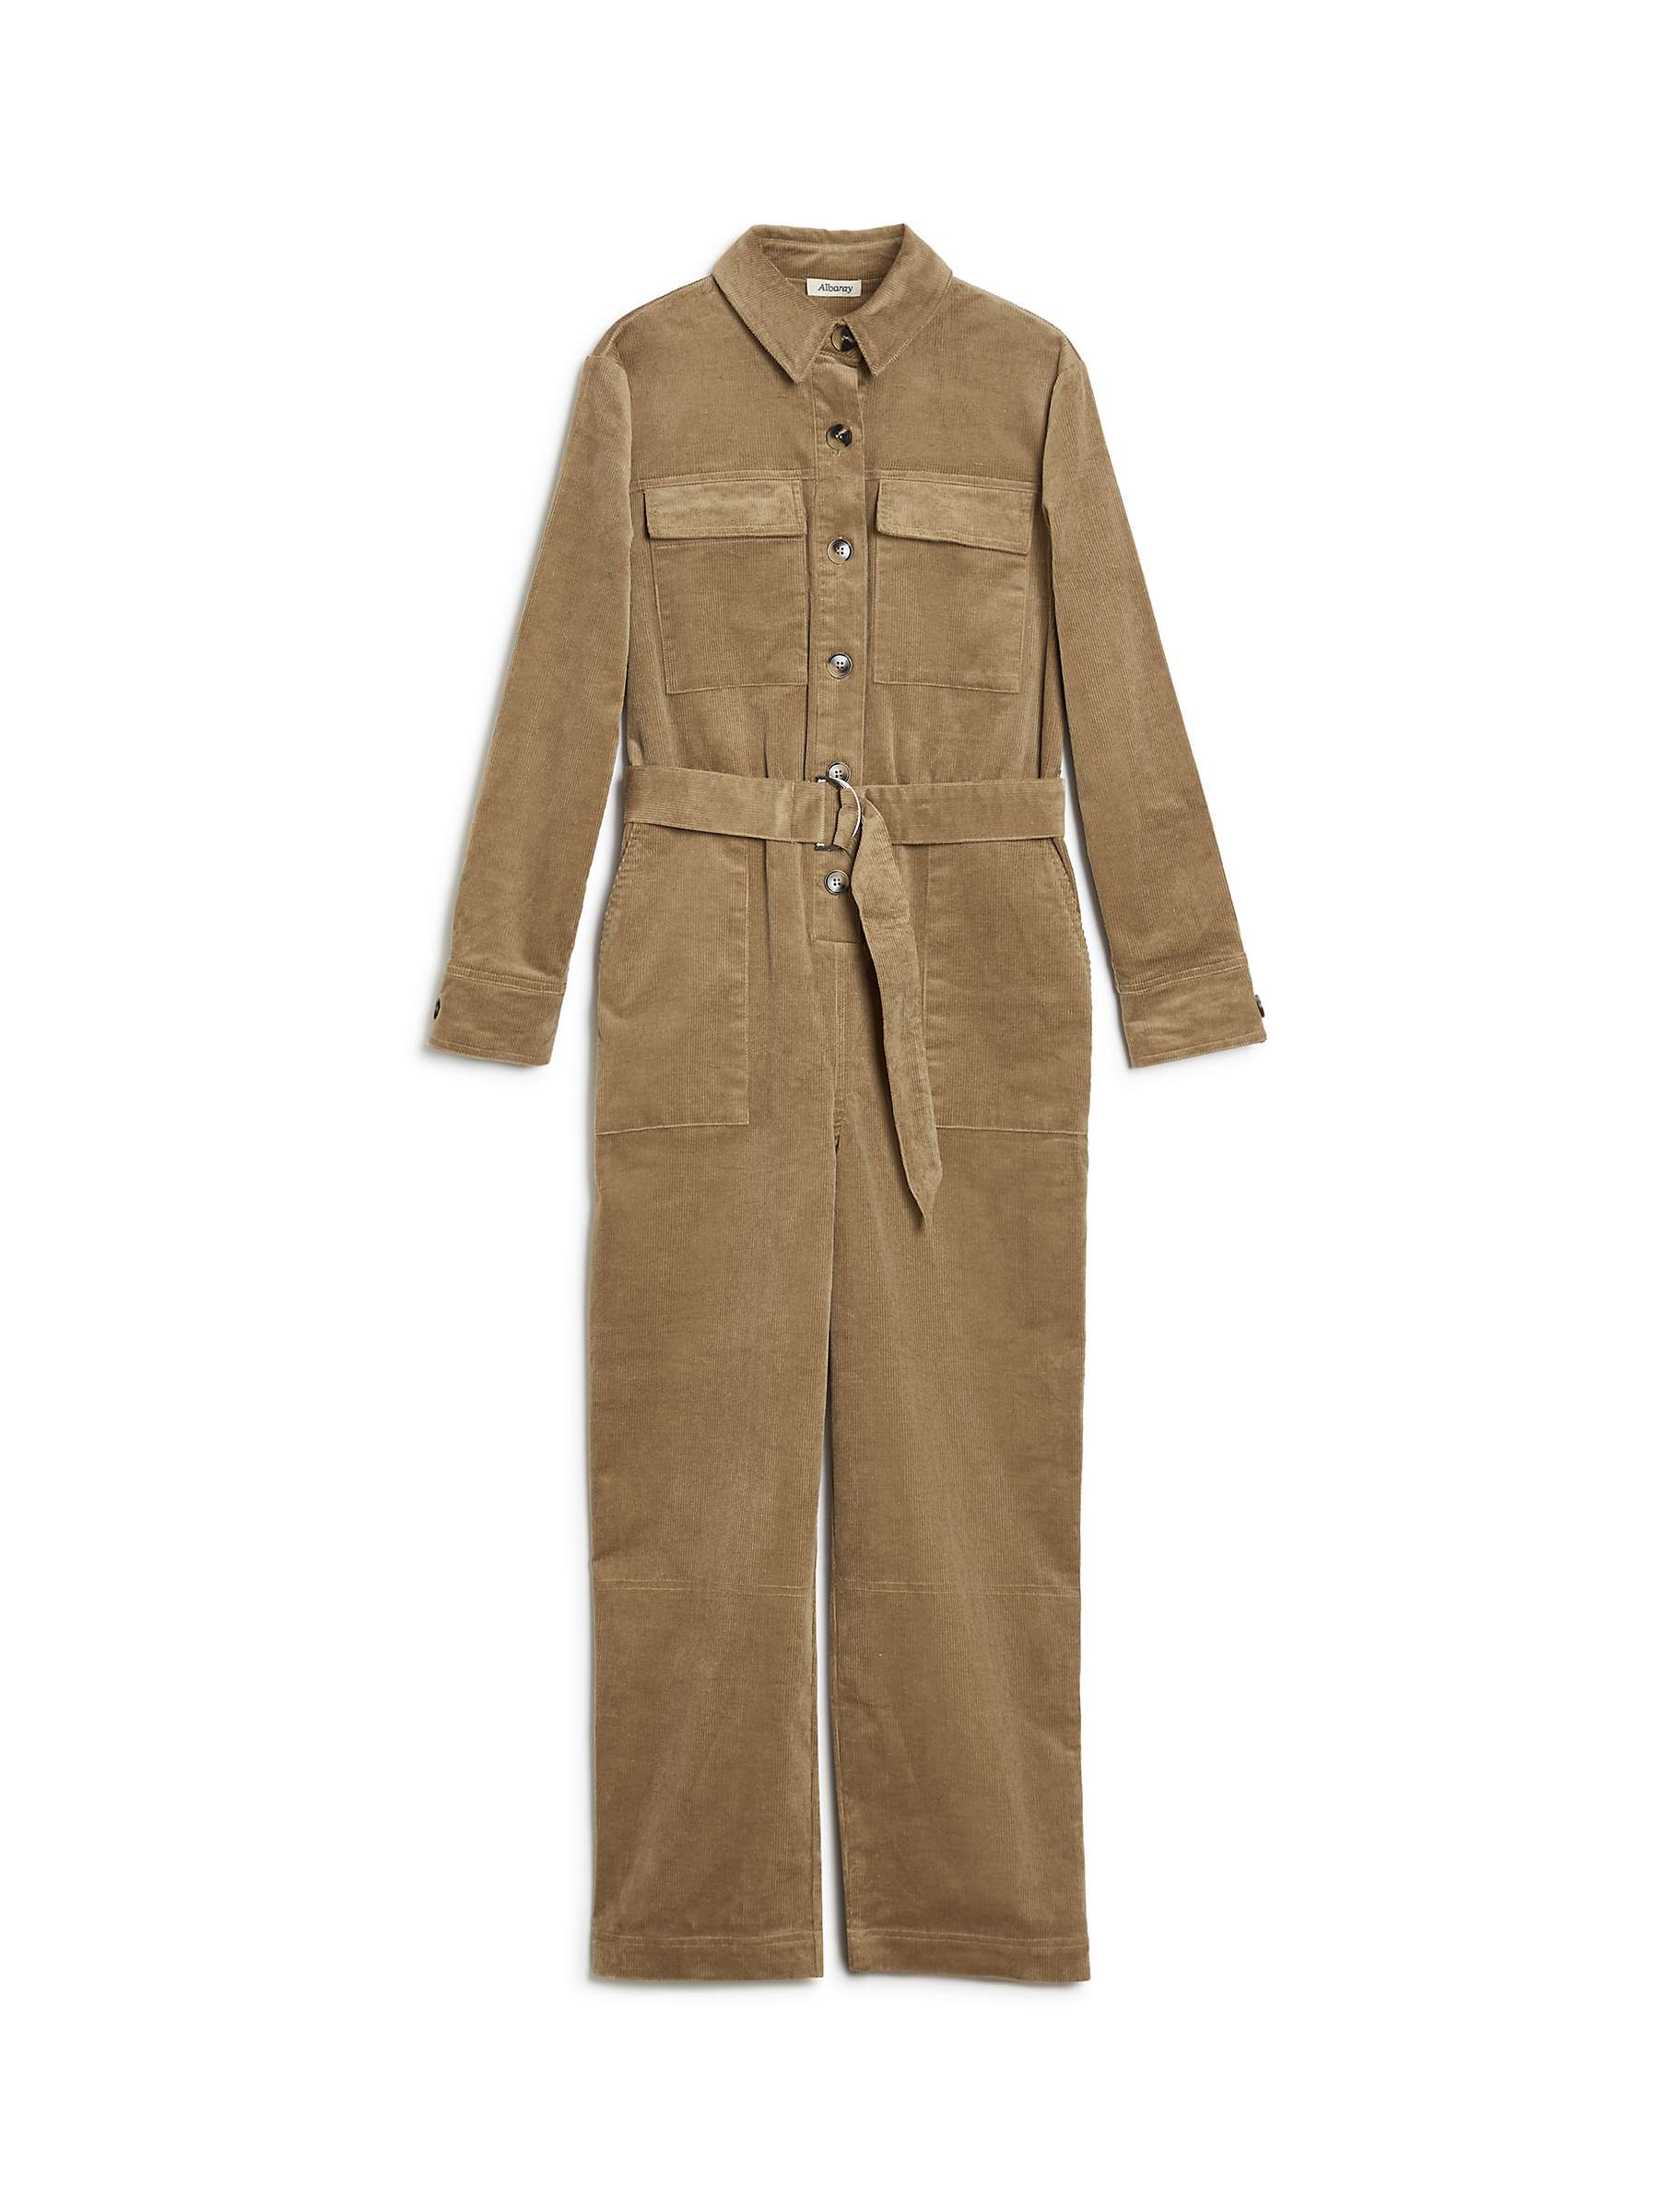 Buy Albaray Cord Utility Jumpsuit, Tan Online at johnlewis.com